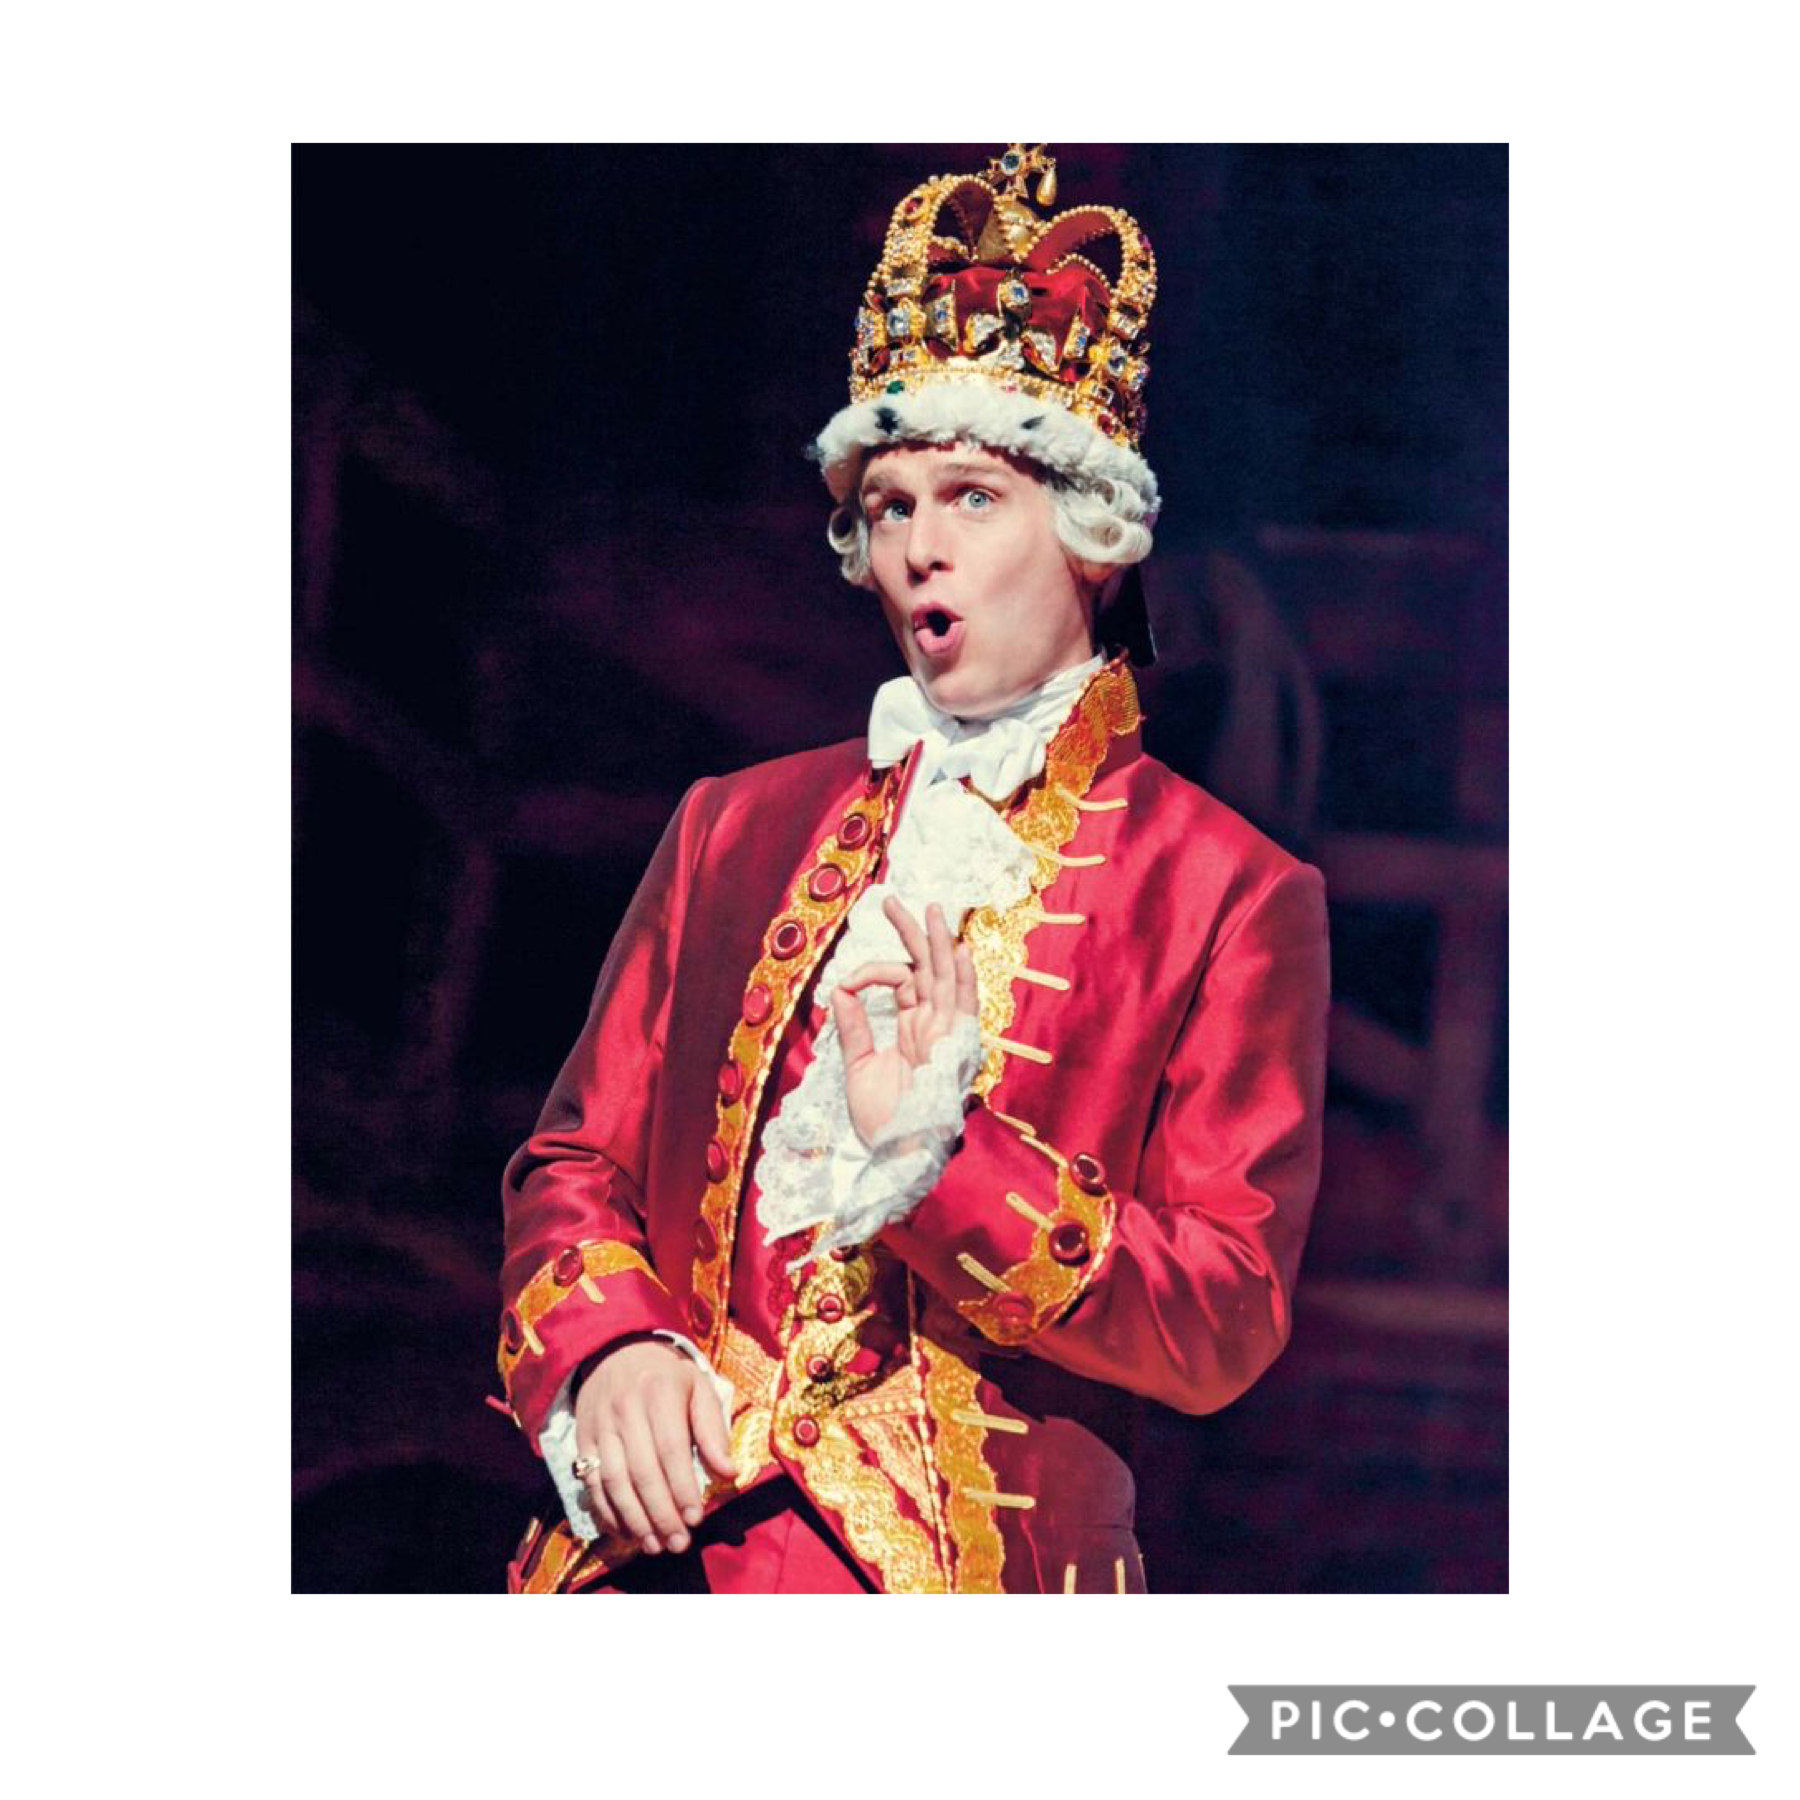 Yooooo it me
In honor of Hamilton being on Disney+ here’s the best character :))) 
My cousins and I are having a ‘watch party’ Sunday and dressing up in our most red carpet outfits we can find